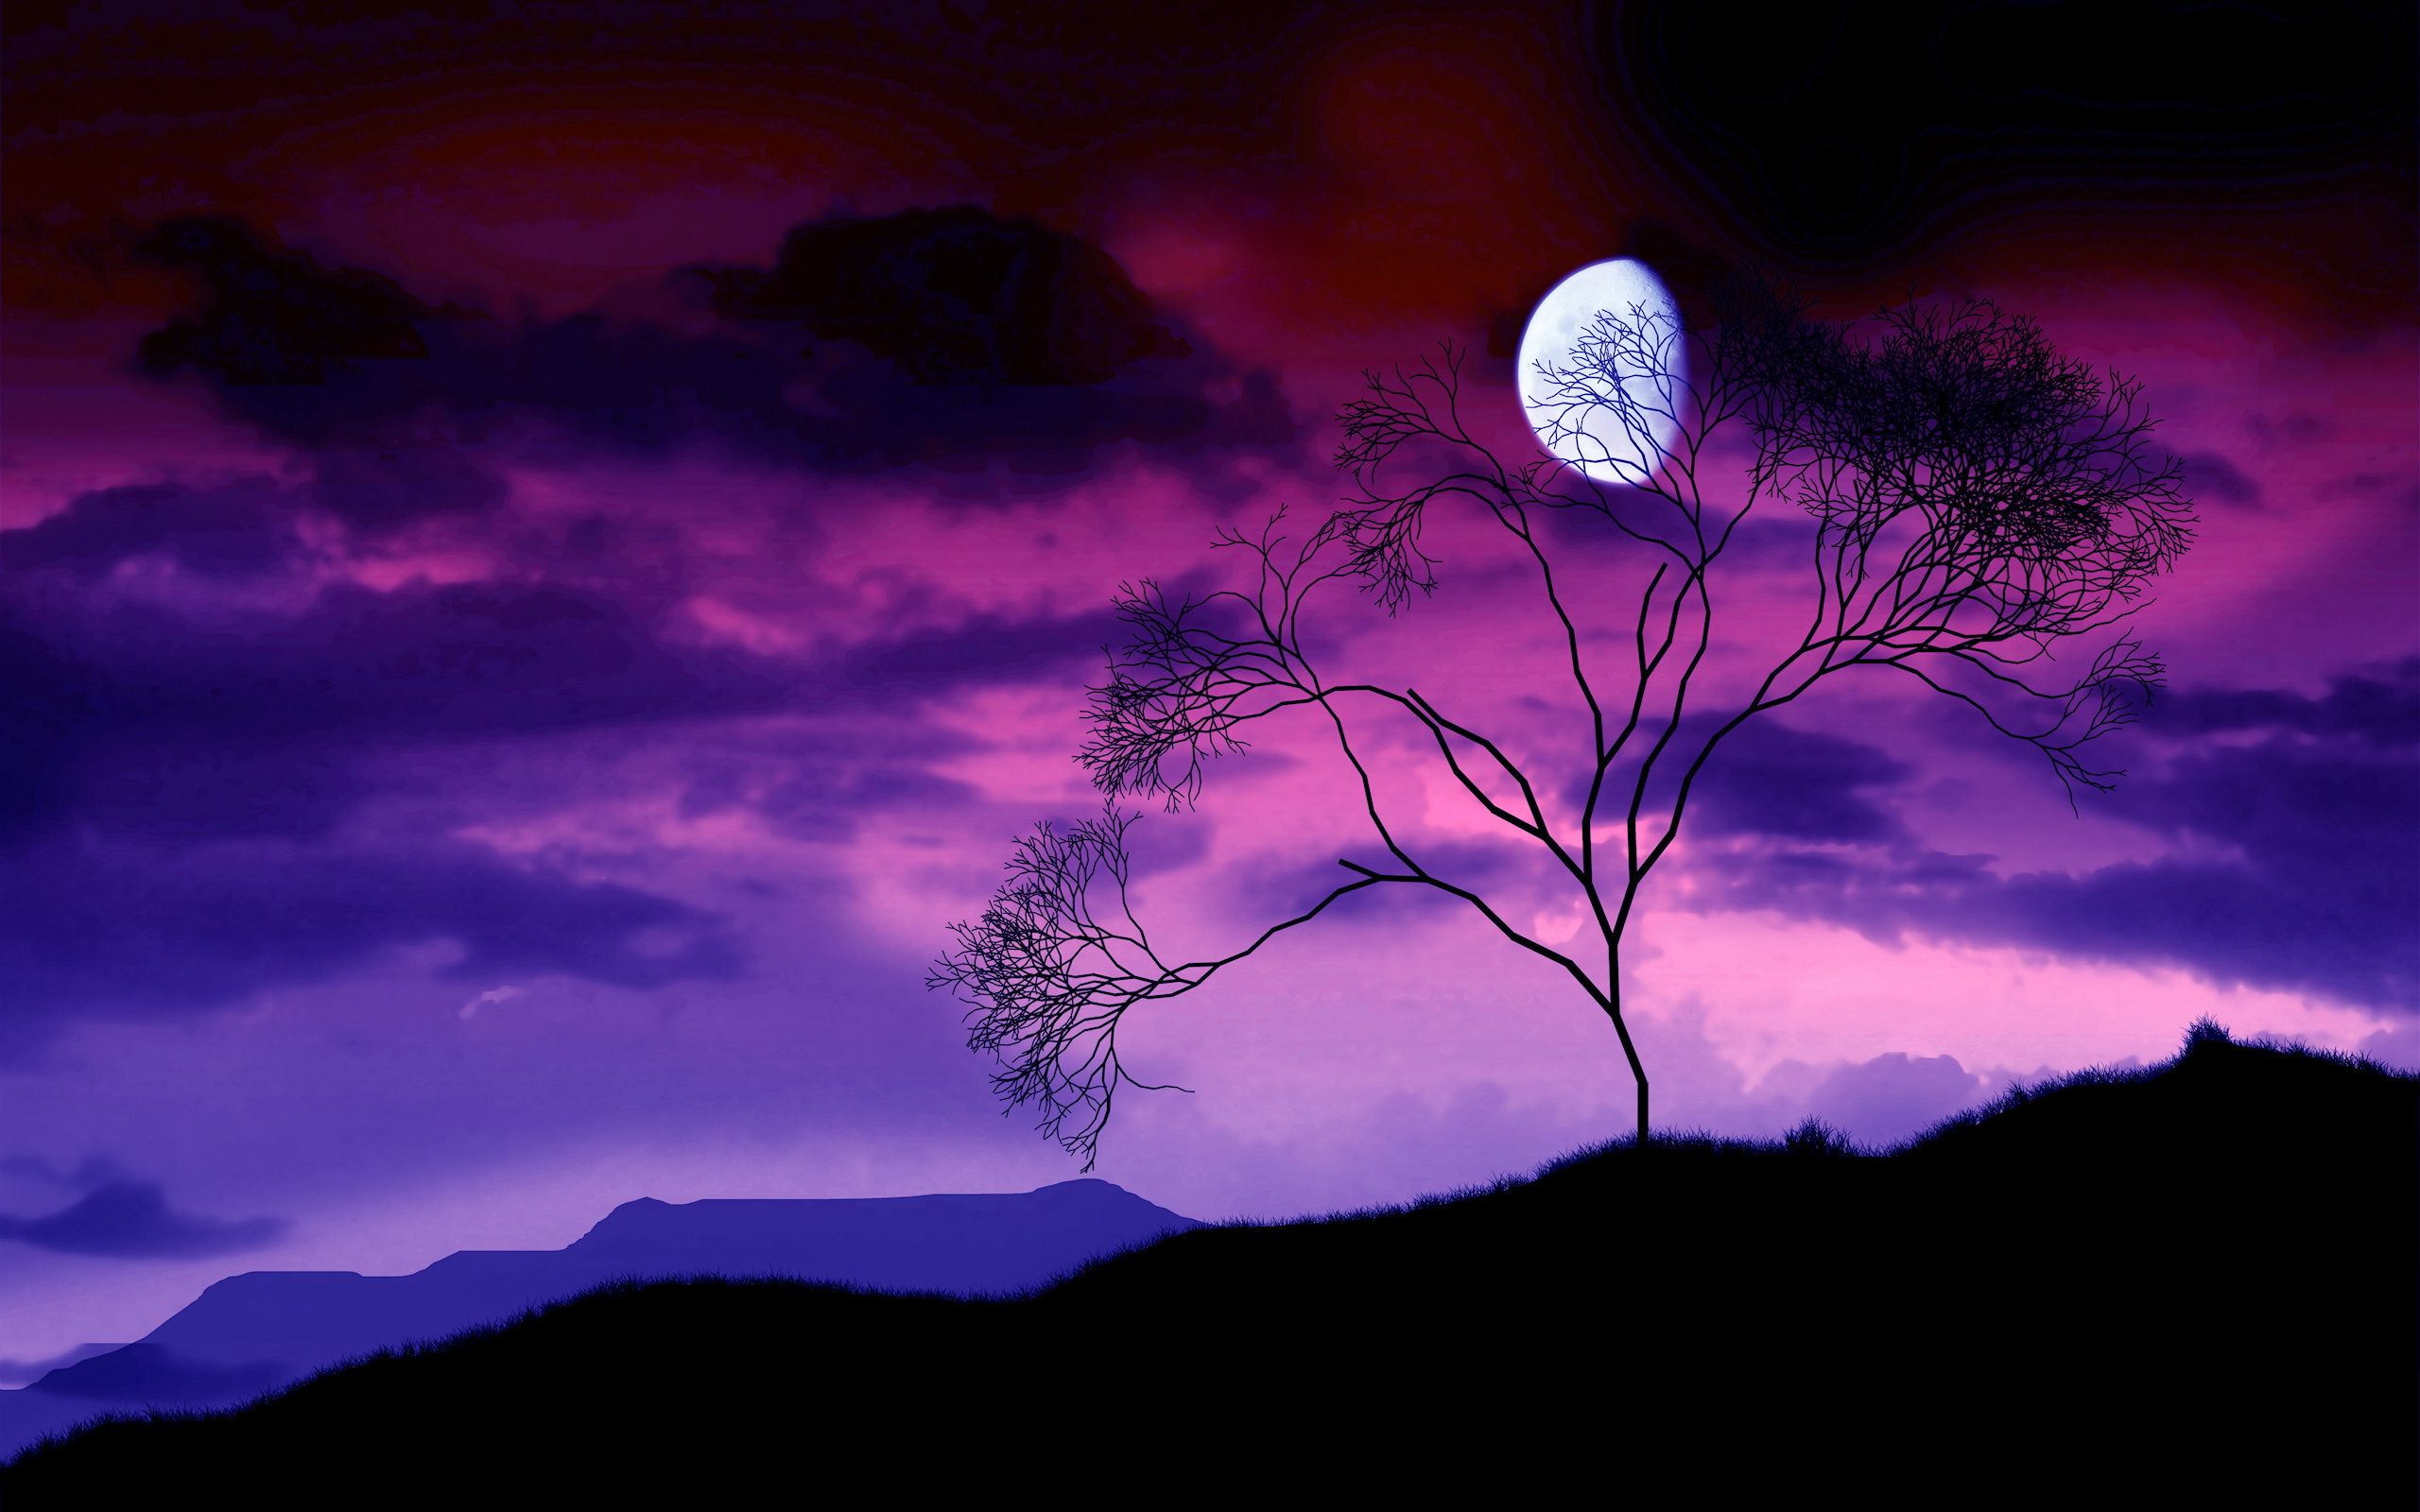 Artistic night scene of a gibbous moon in a sky with purple and pink ...